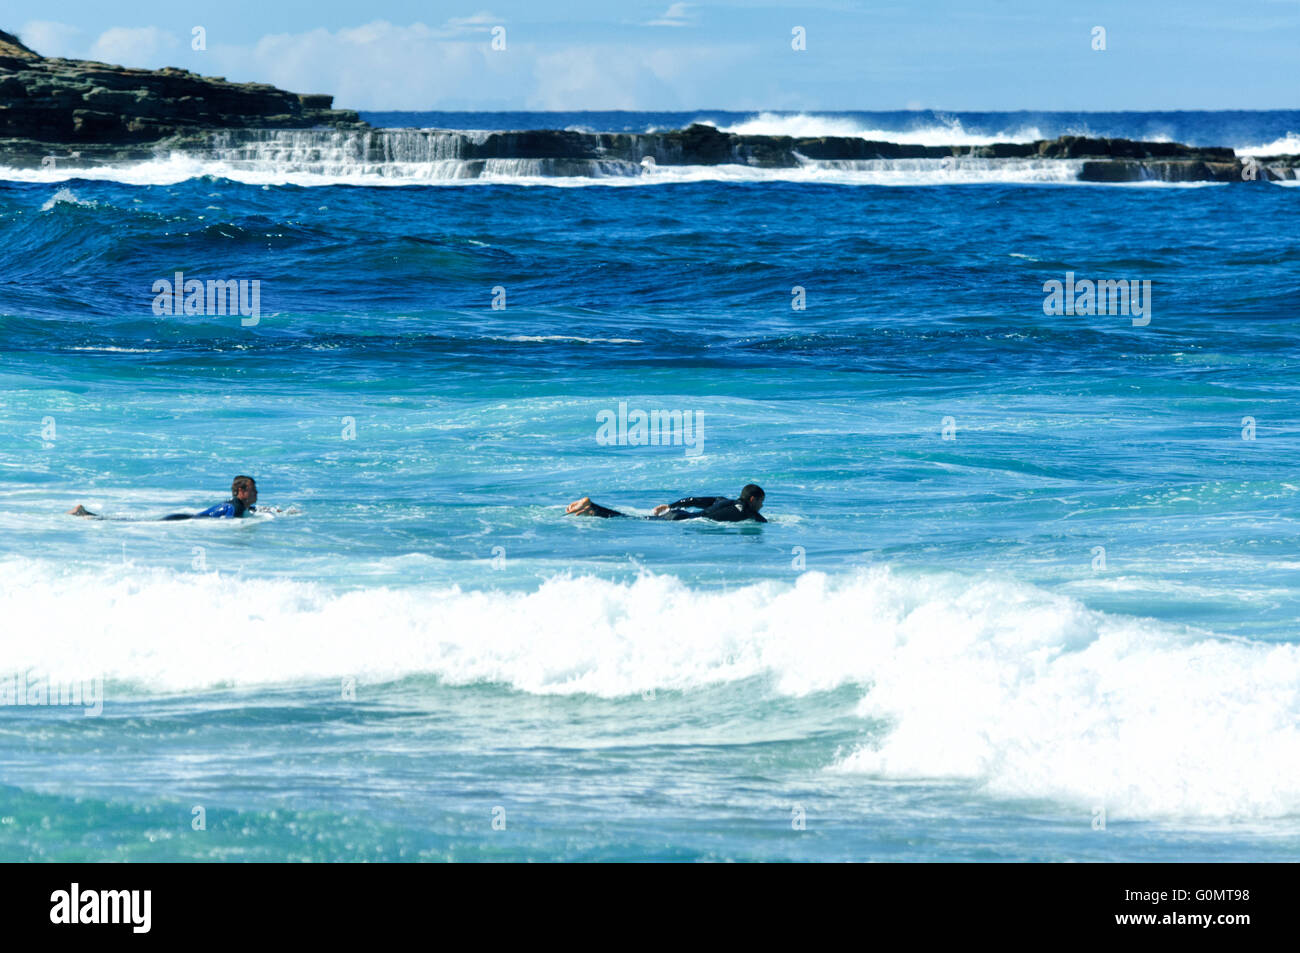 Two Surfers body paddling, Royal National Park, New South Wales, Australia Stock Photo